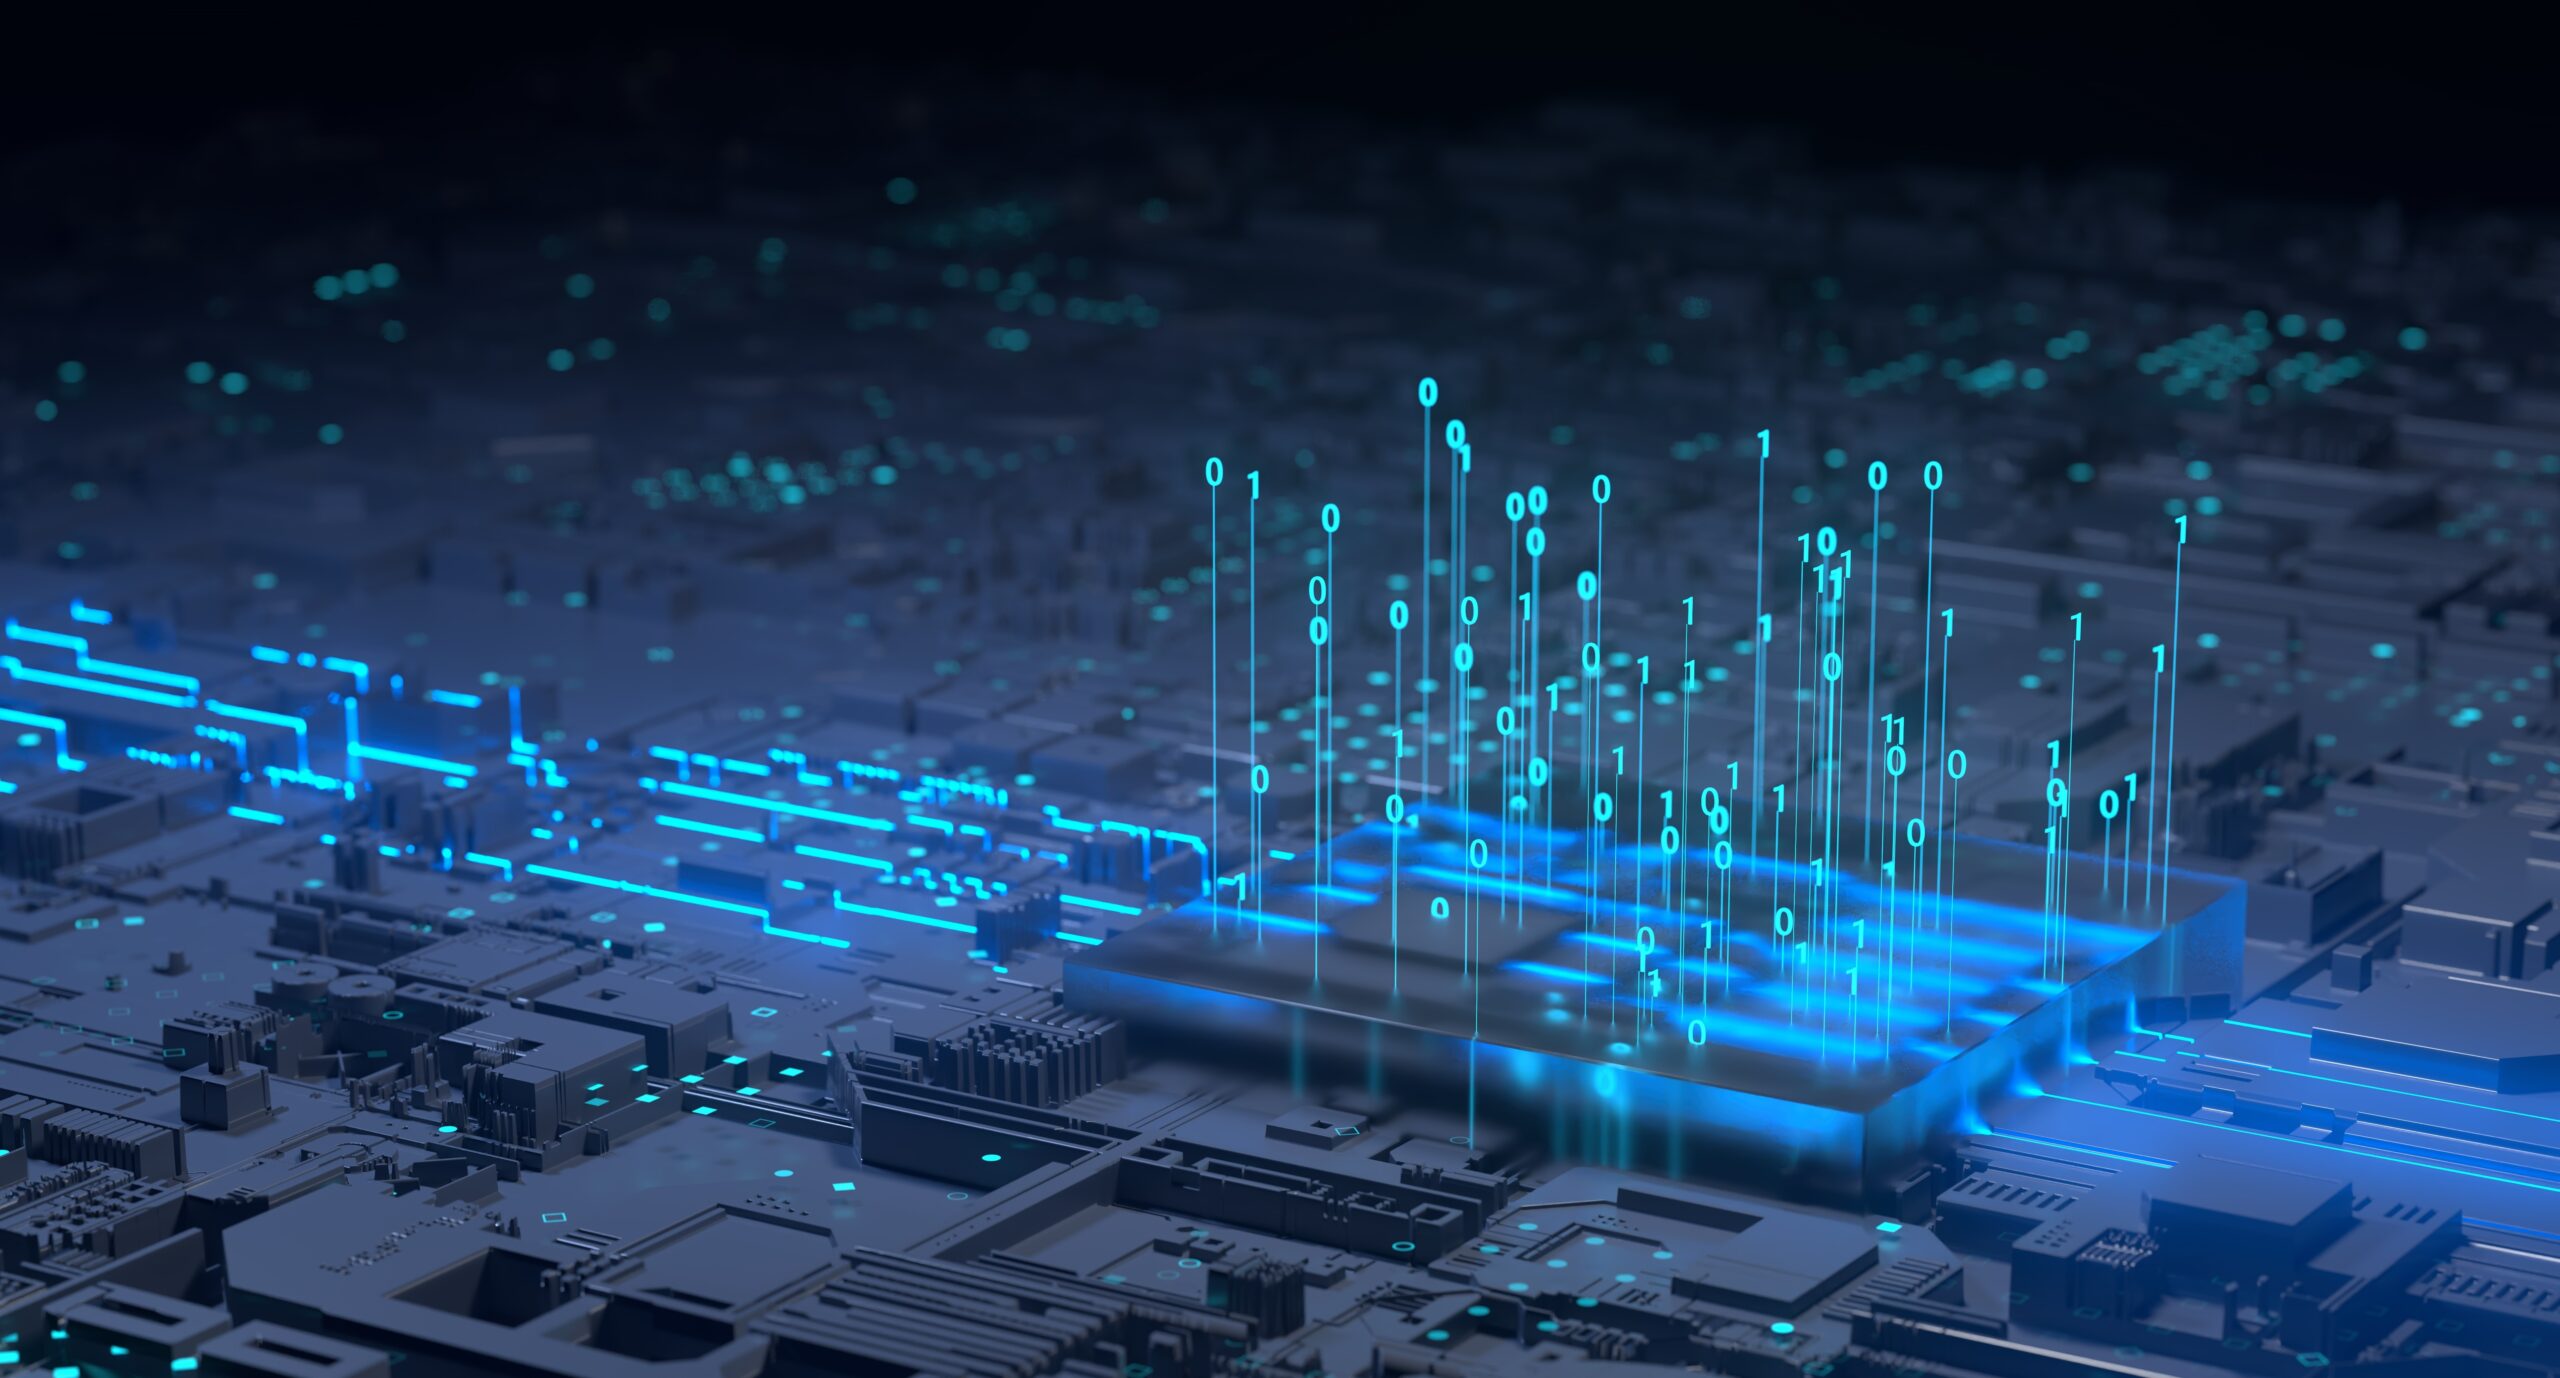 A futuristic circuit board with glowing blue lines and binary code projections. The image suggests digital data transmission or advanced technology with numerous electronic components interconnected in a complex network. - CSA Catapult